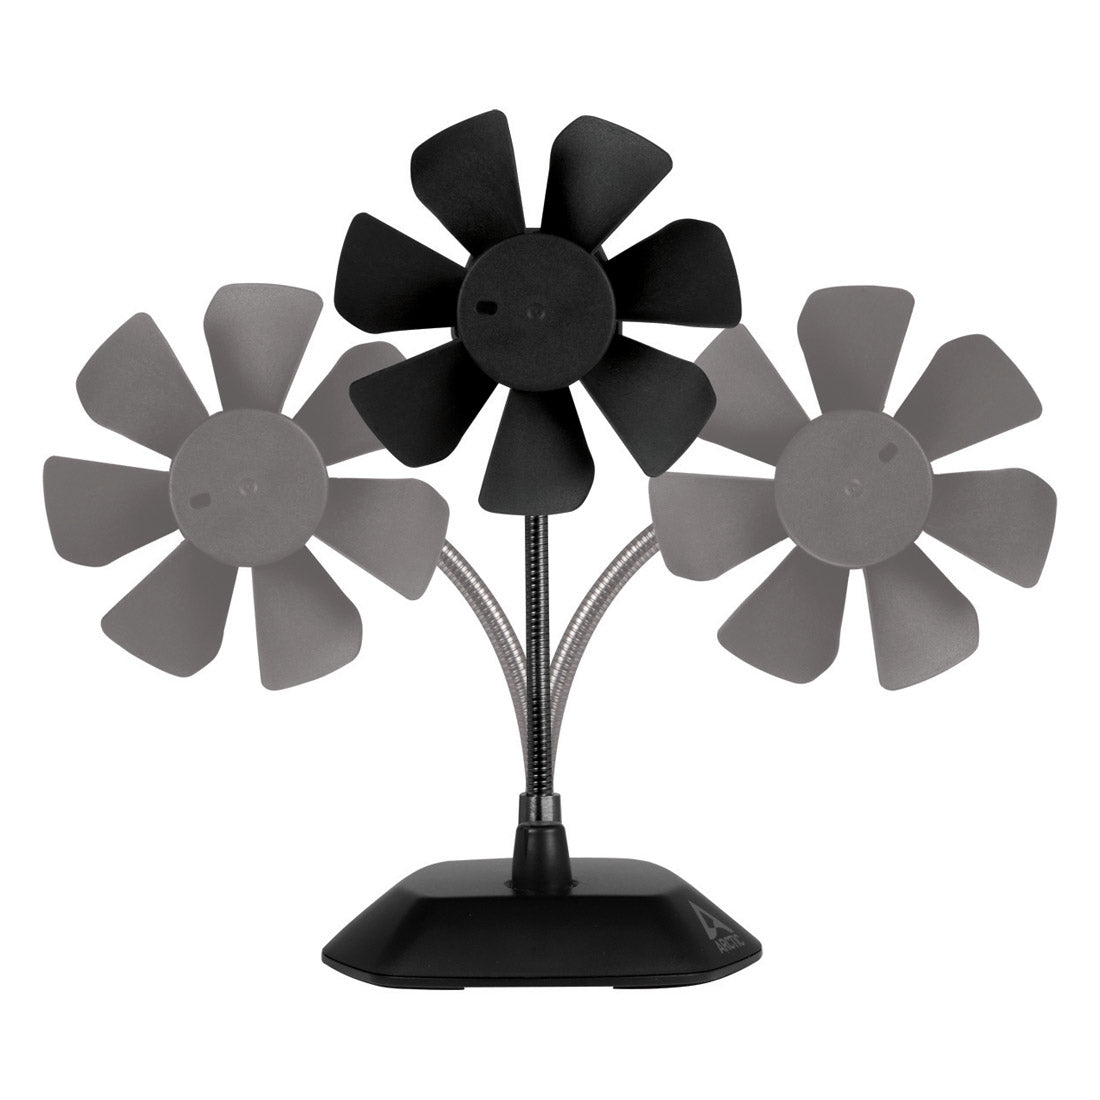 [Repacked] ARCTIC Breeze Color Portable USB Table Fan for Office and Laptop - Black